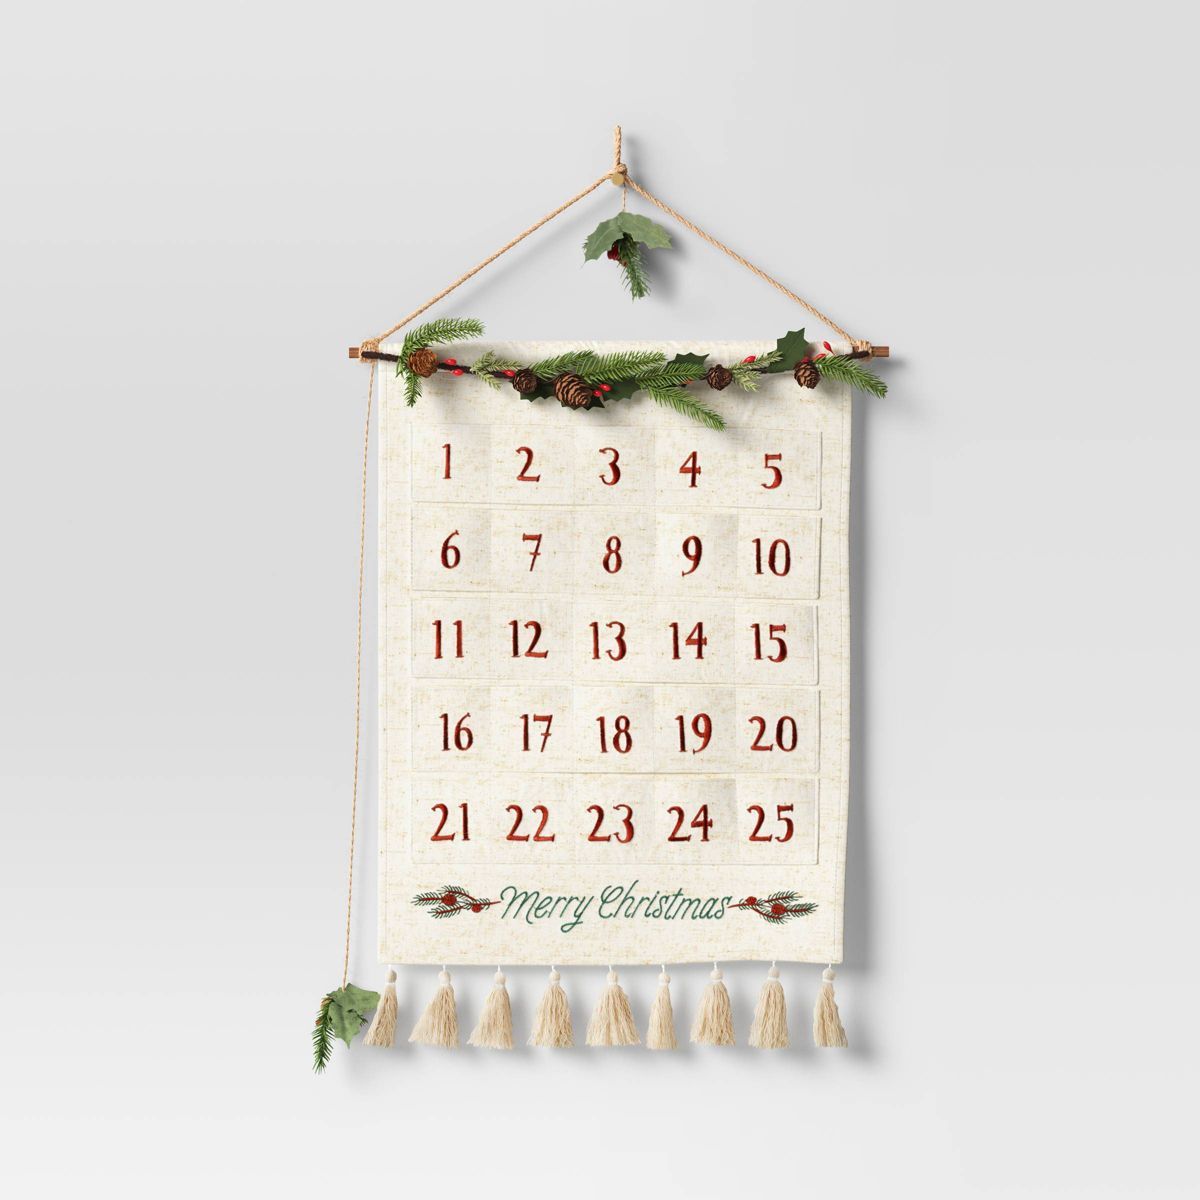 22" Fabric 'Merry Christmas' Hanging Advent Calendar with Mixed Greenery White - Wondershop™ | Target